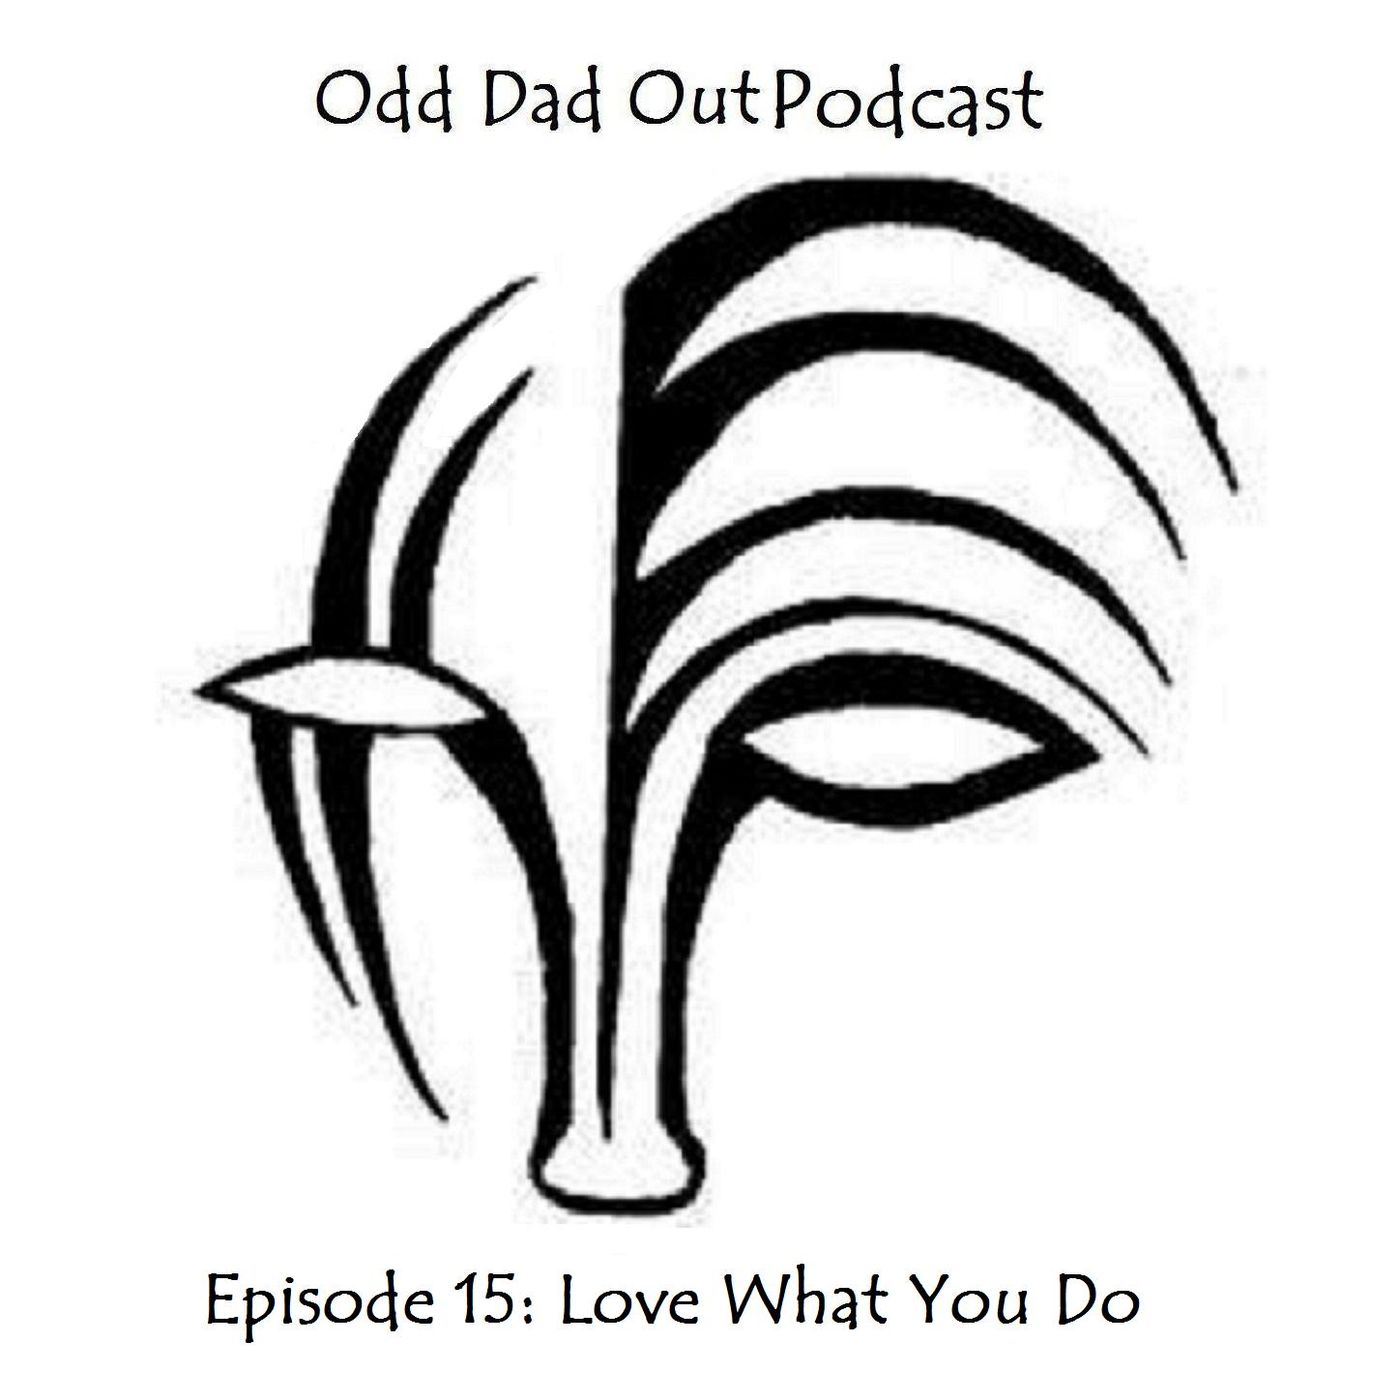 Episode 15: Love What You Do